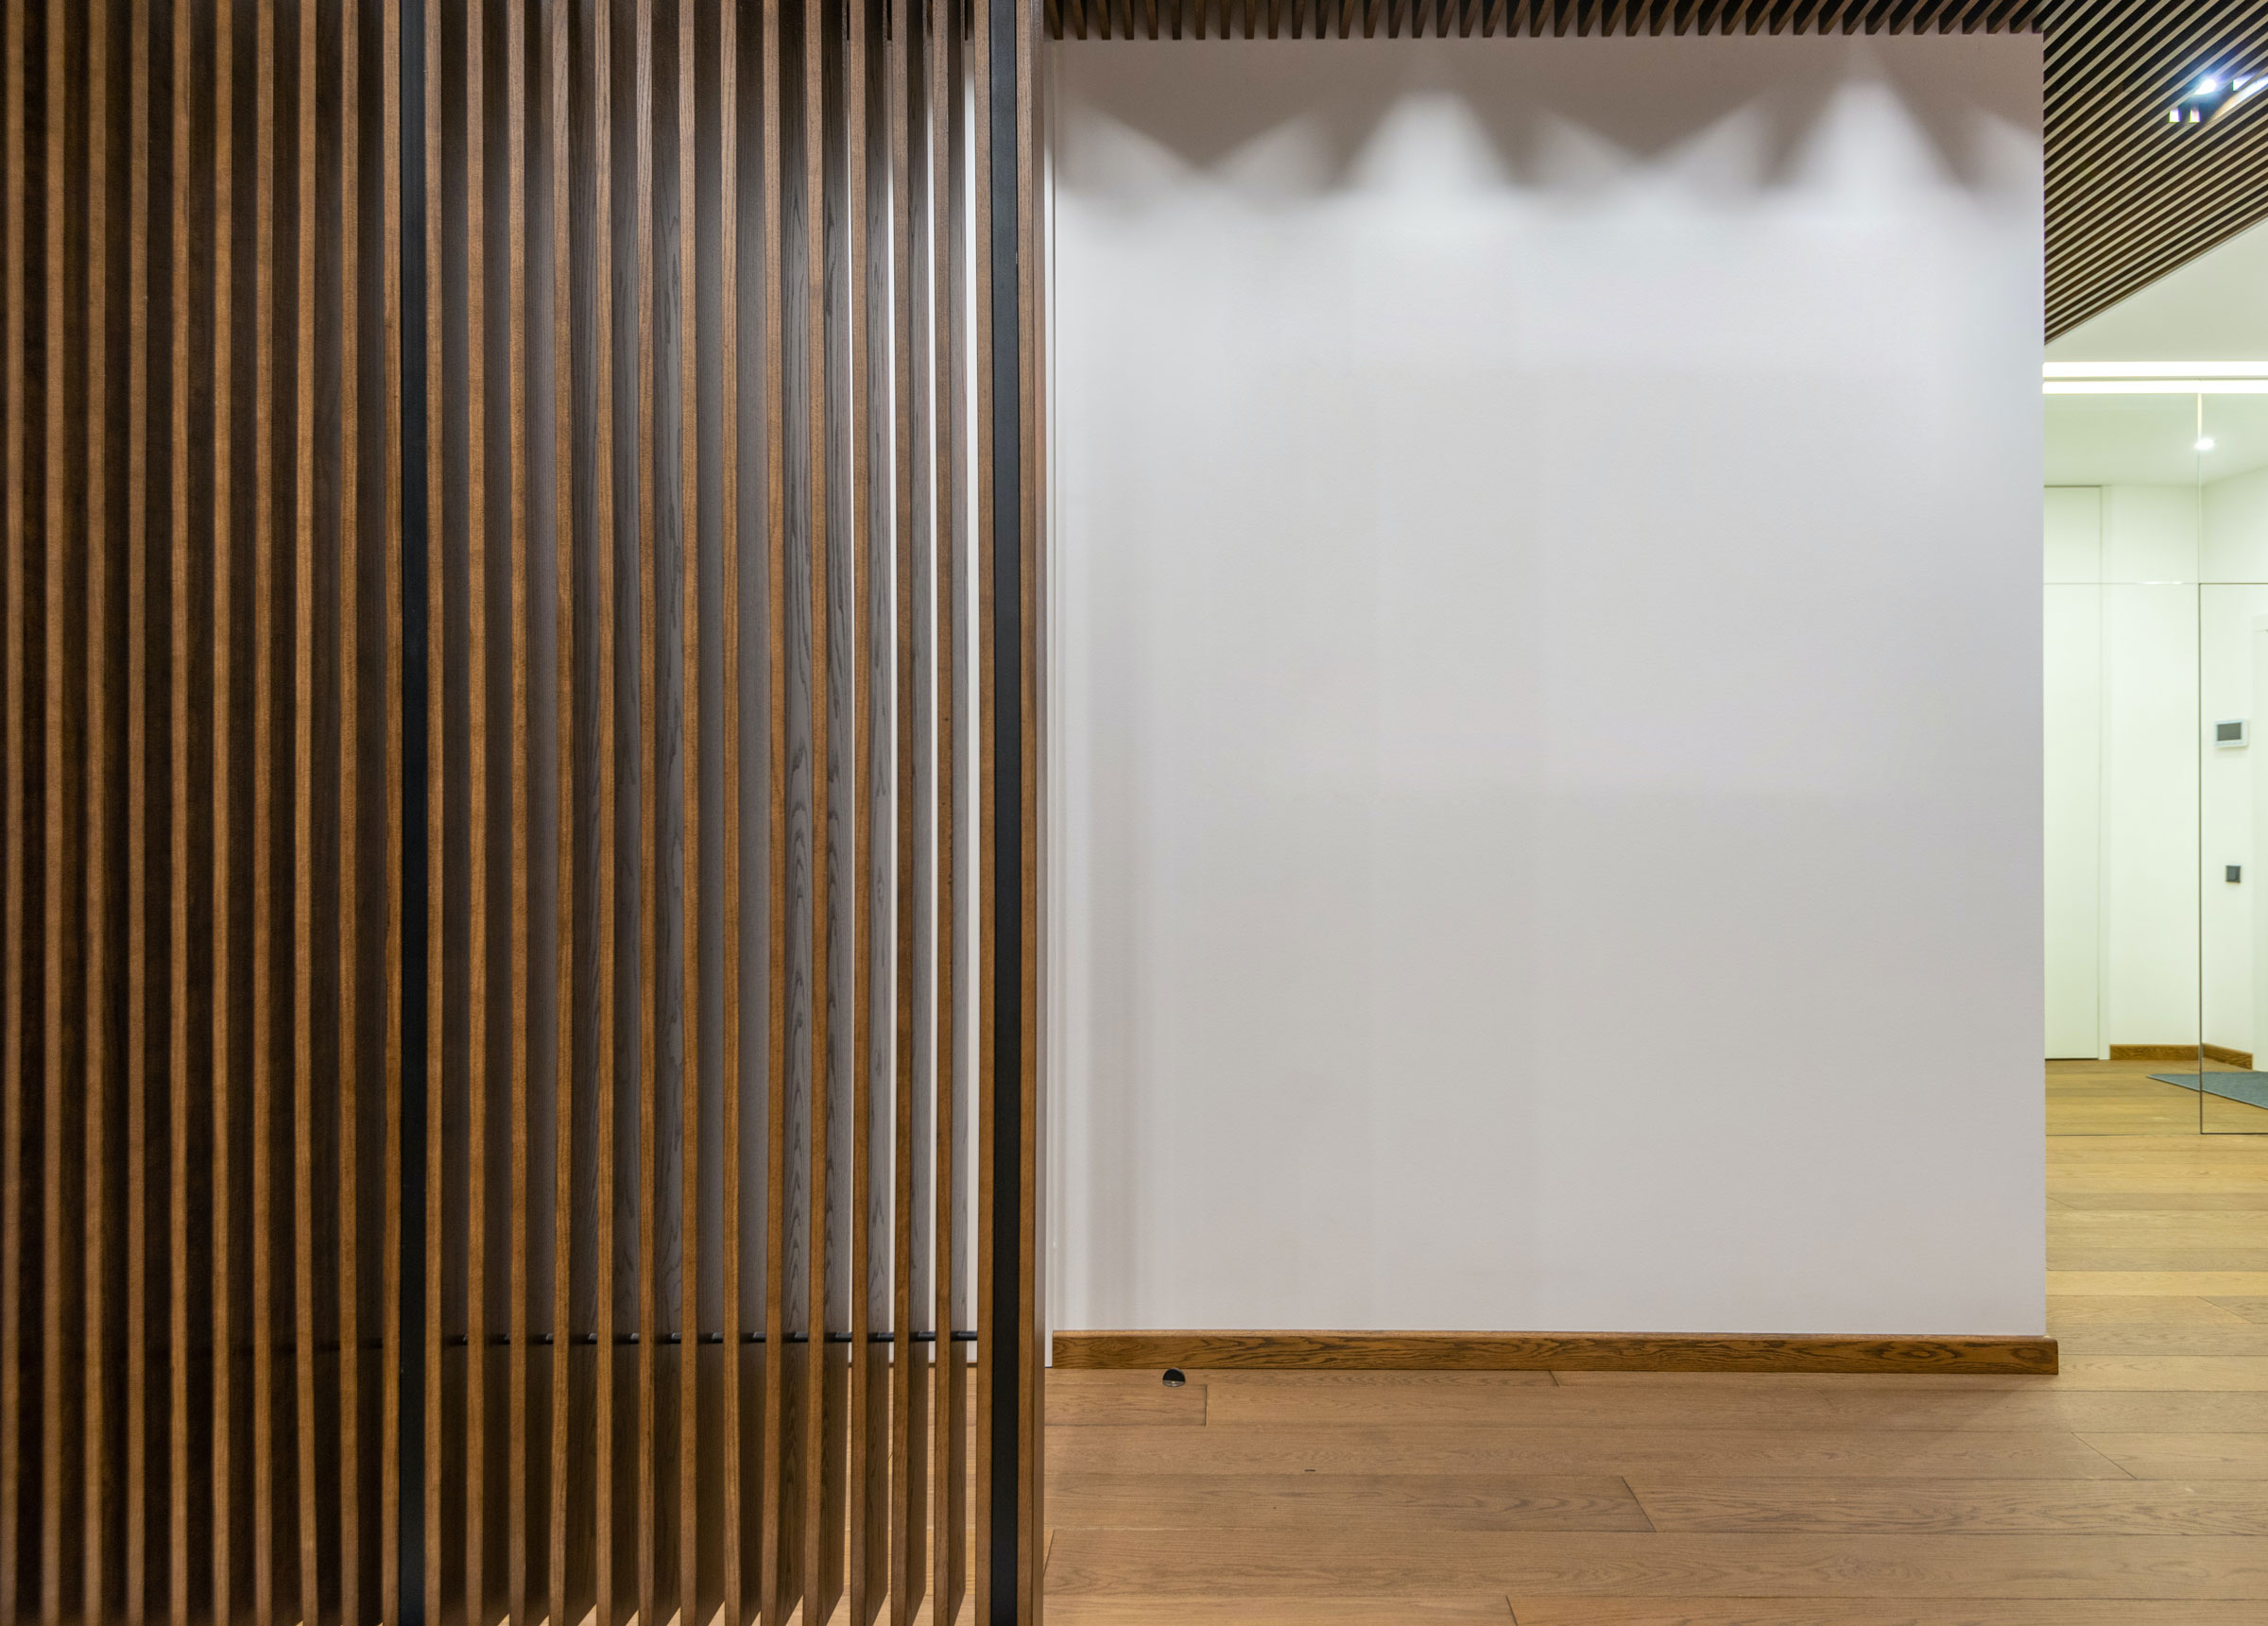 Custom Wood Panels Make for Unbeatable Authenticity and Innovation